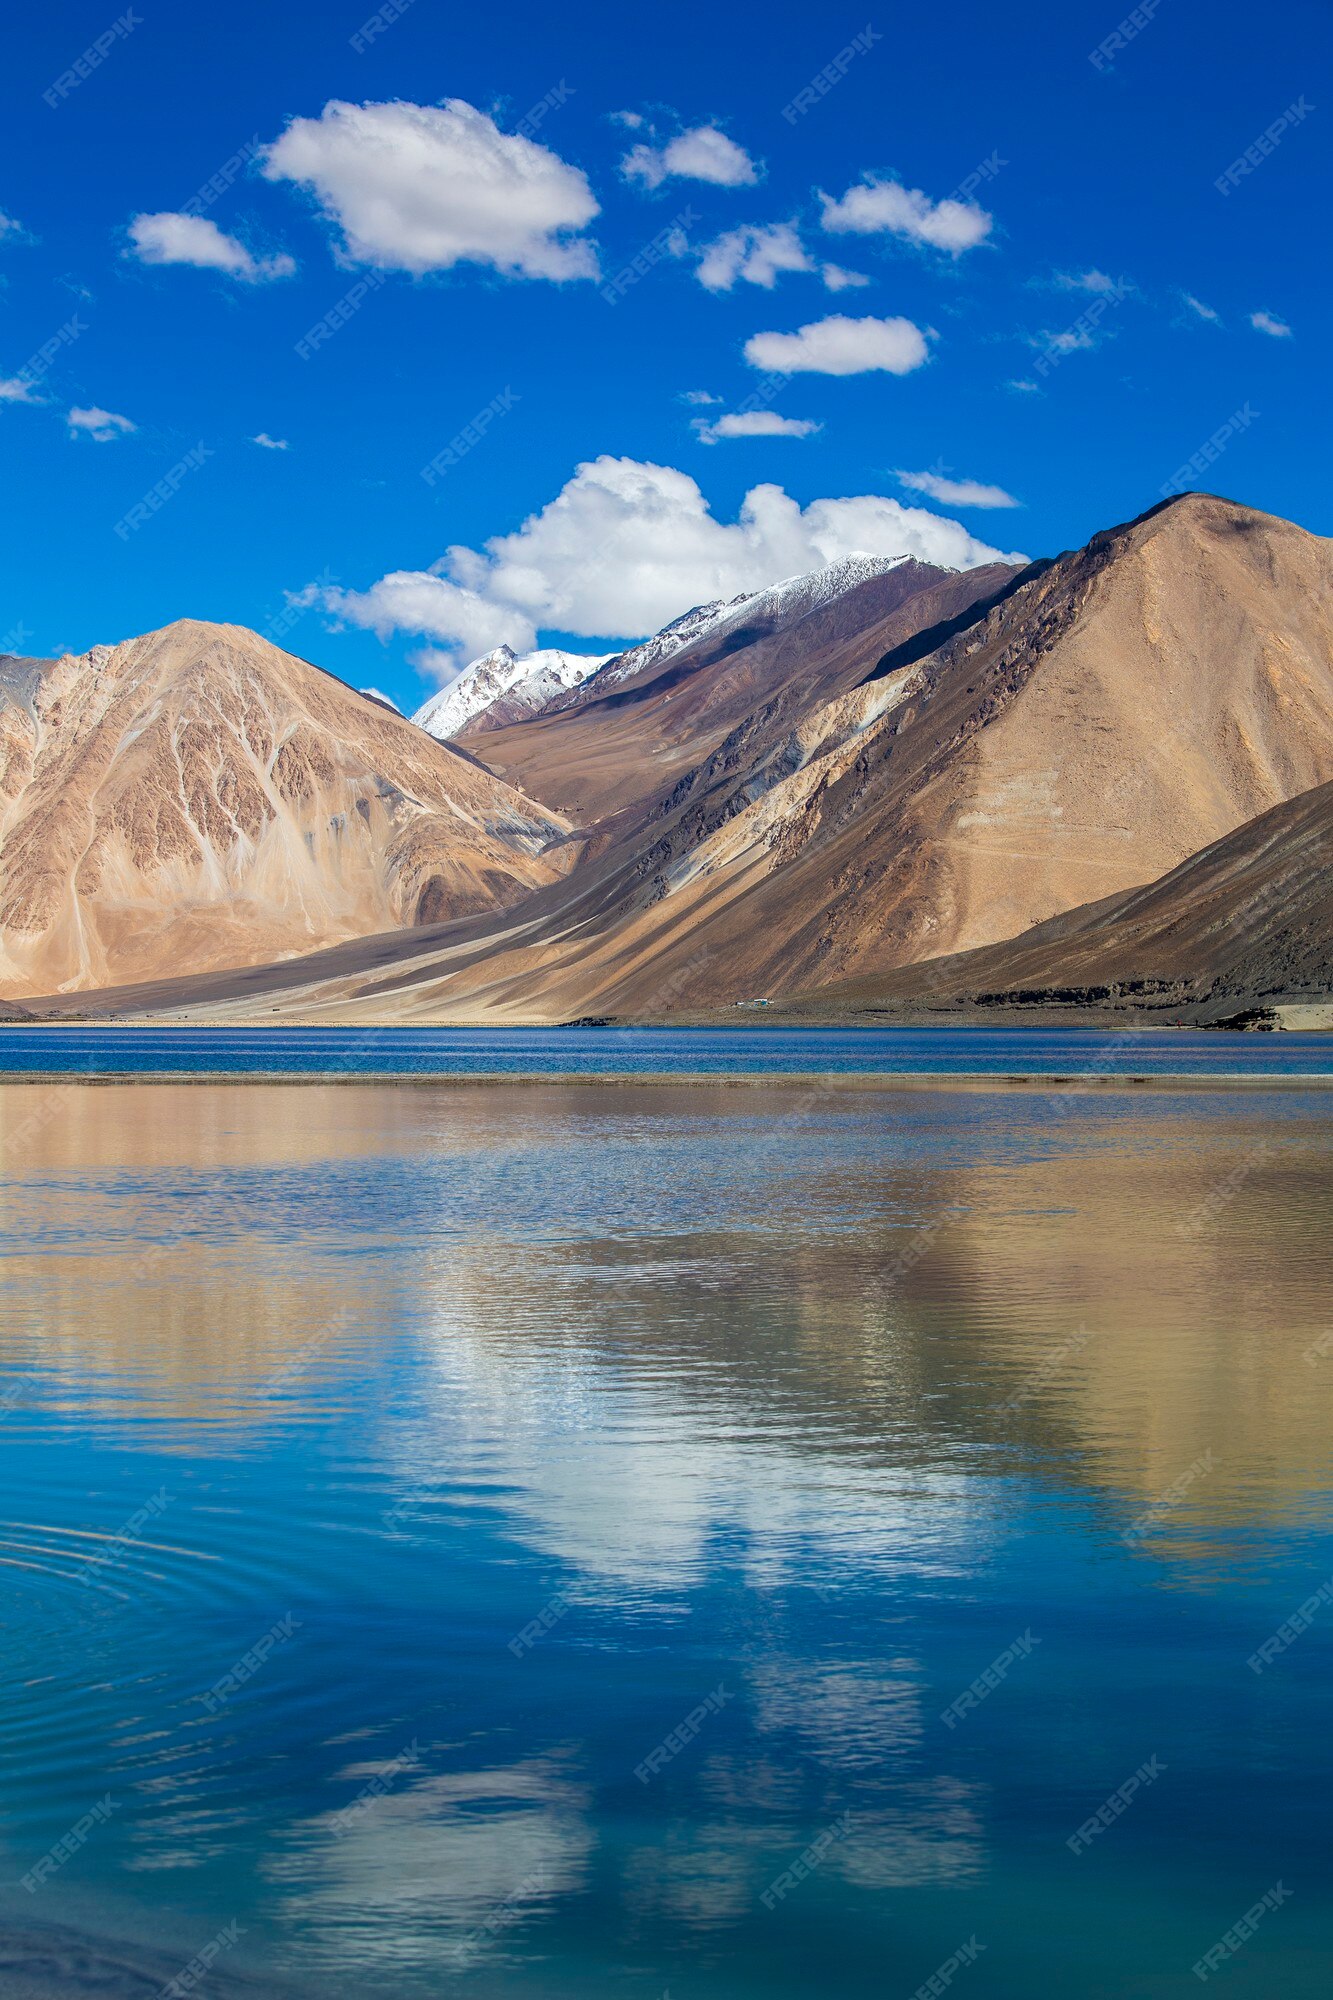 Premium Photo | View of majestic rocky mountains against the blue sky and  lake pangong in indian himalayas, ladakh region, jammu and kashmir, india.  nature and travel concept